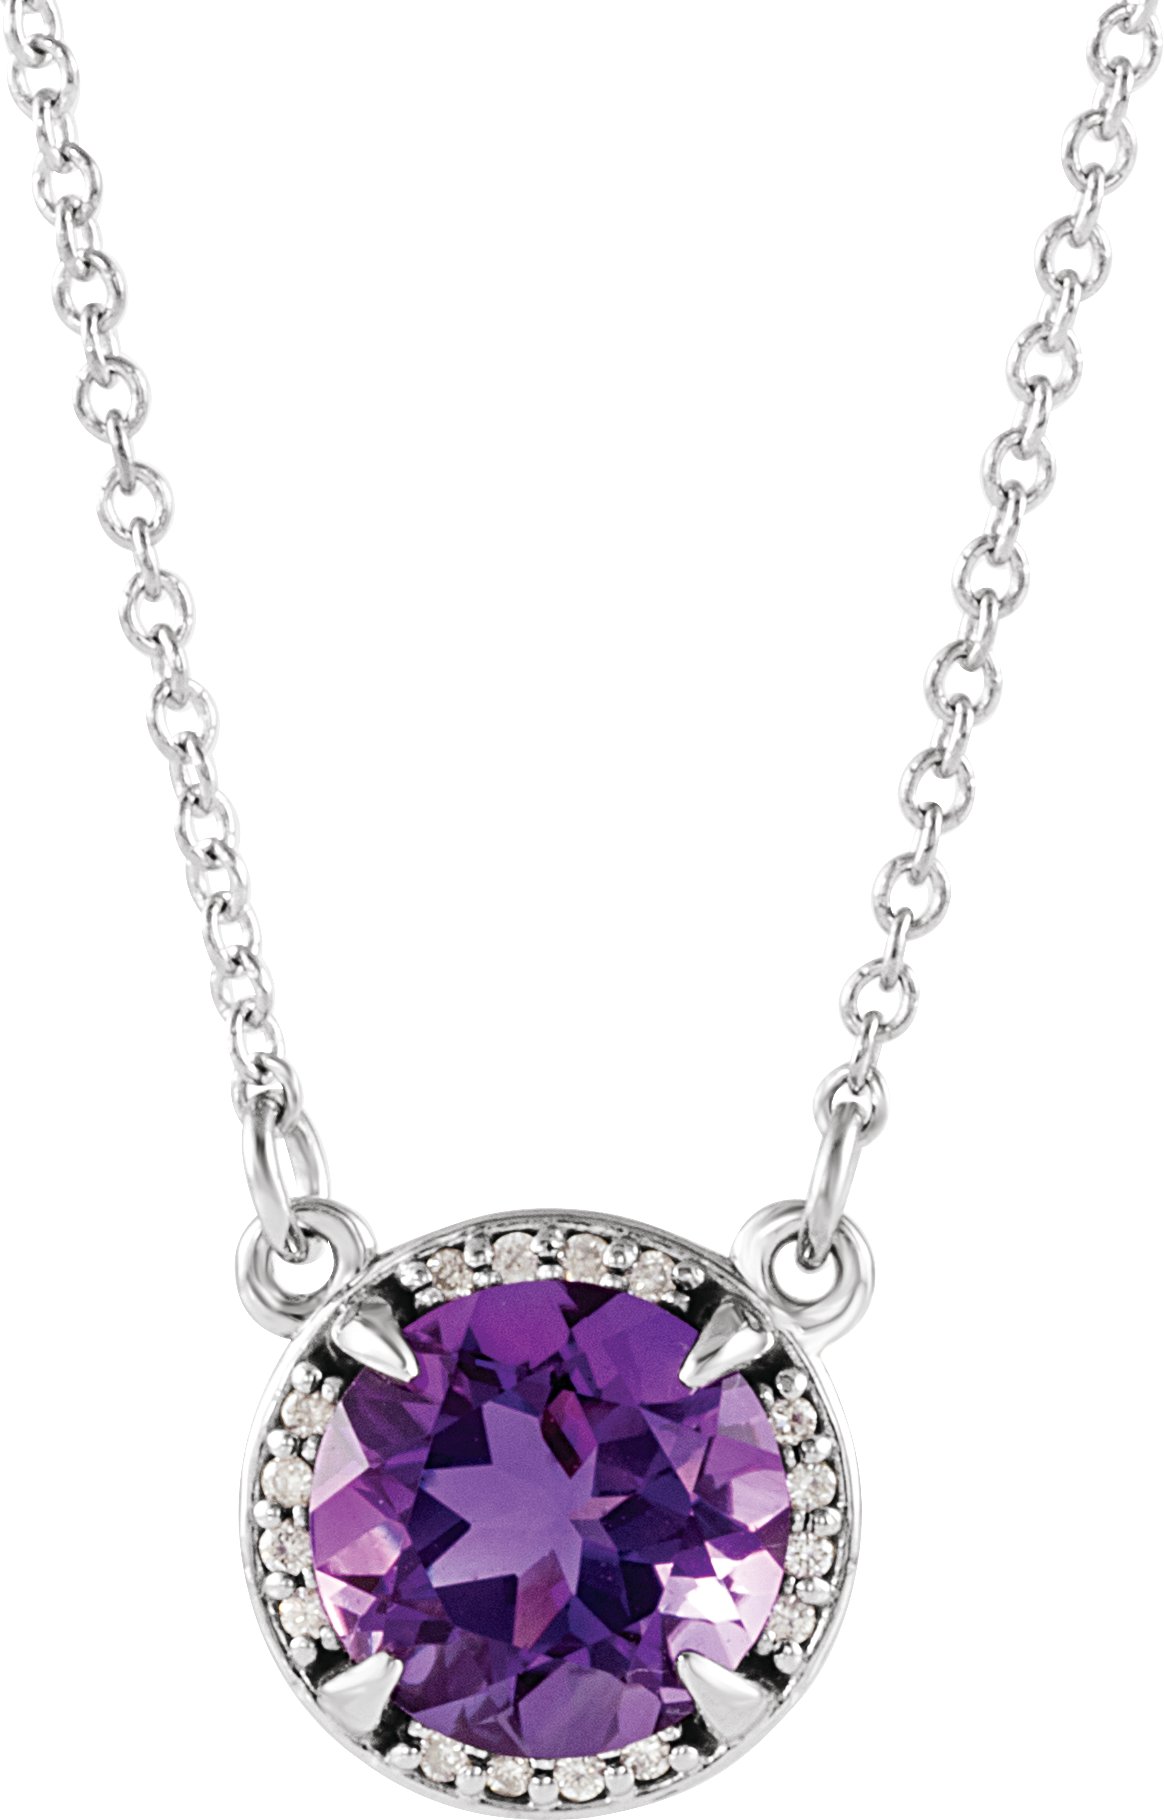 14K Rose 7 mm Round Chatham Created Alexandrite and .04 CTW Diamond 16 inch Necklace Ref 13127159